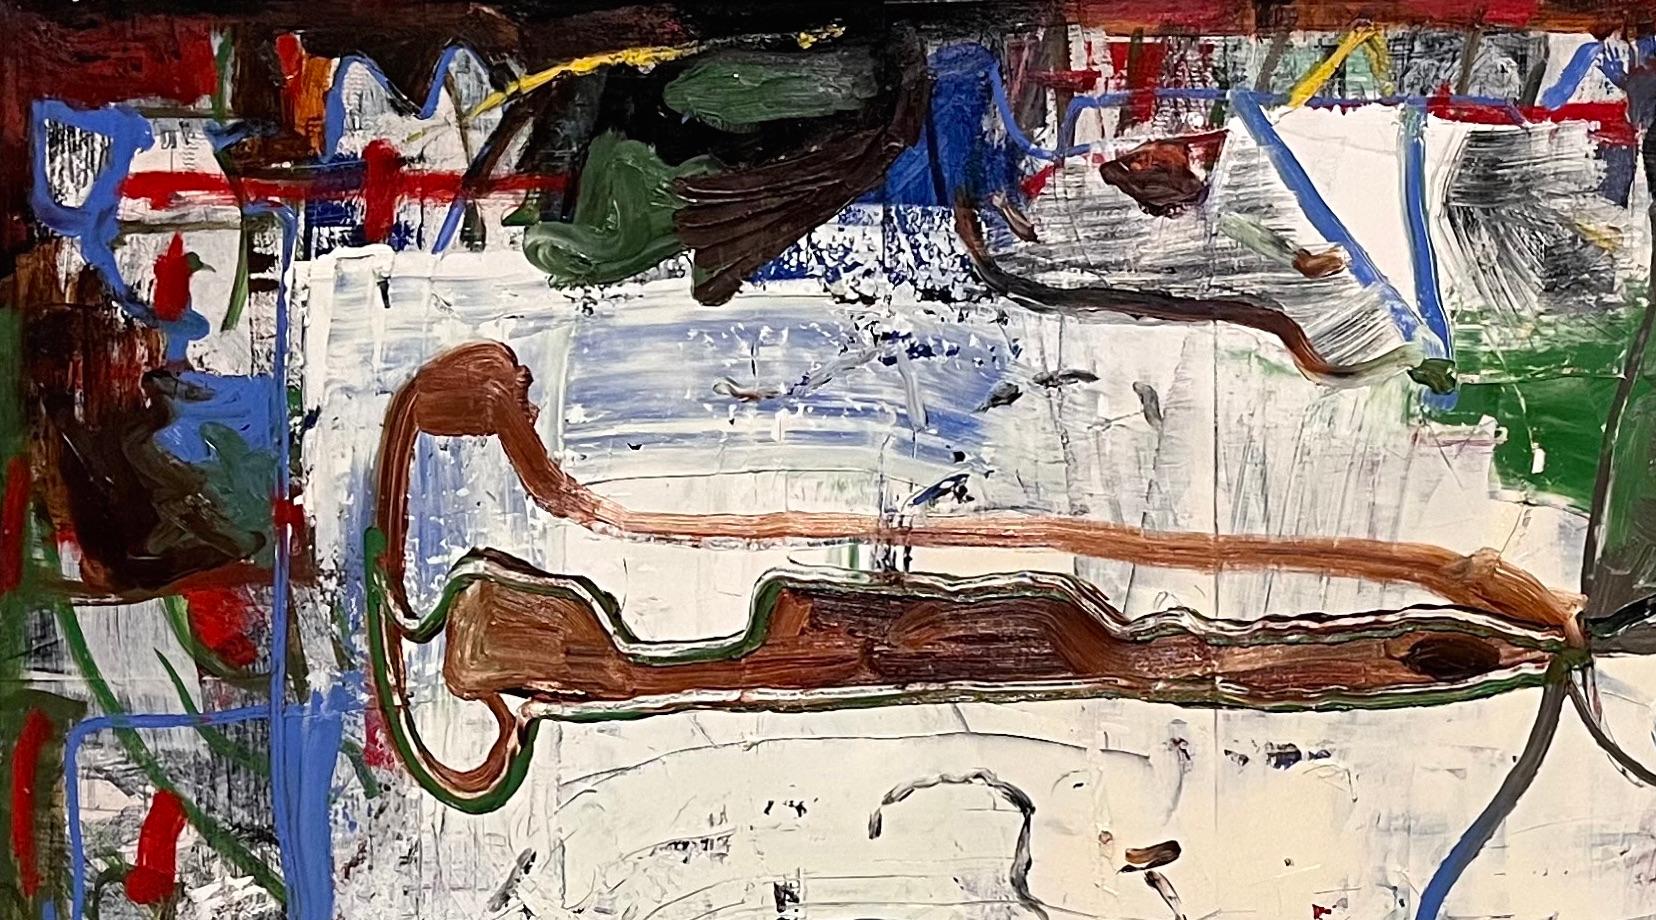 Untitled - Abstract Expressionist Mixed Media Art by Dick Wray